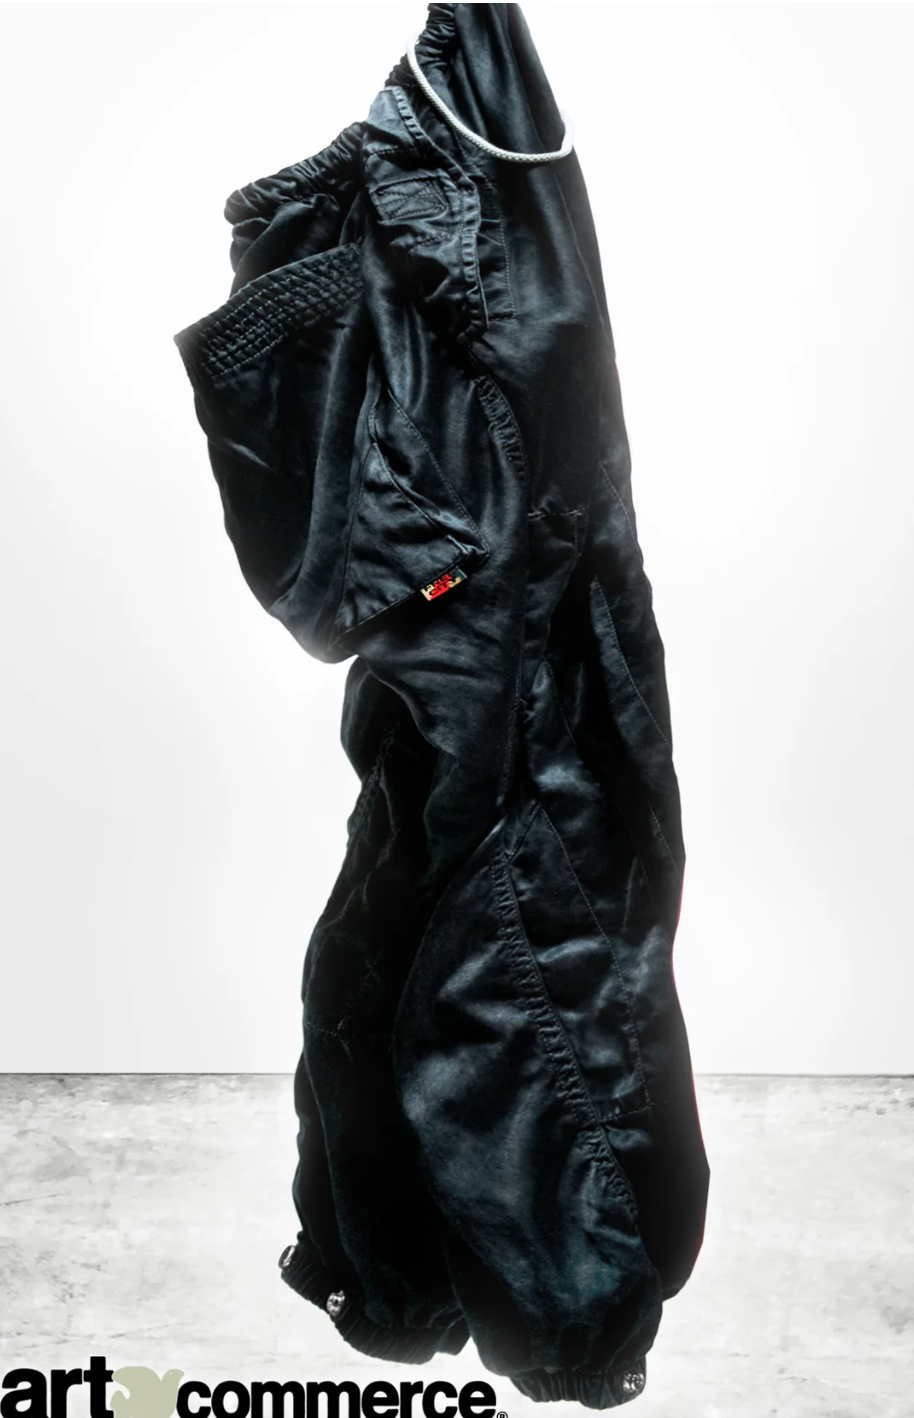 A puffy black winter coat stands upright on its own, seemingly filled with air. The coat's textural details and a small red tag marked "MADE IN USA" are visible against a white background.